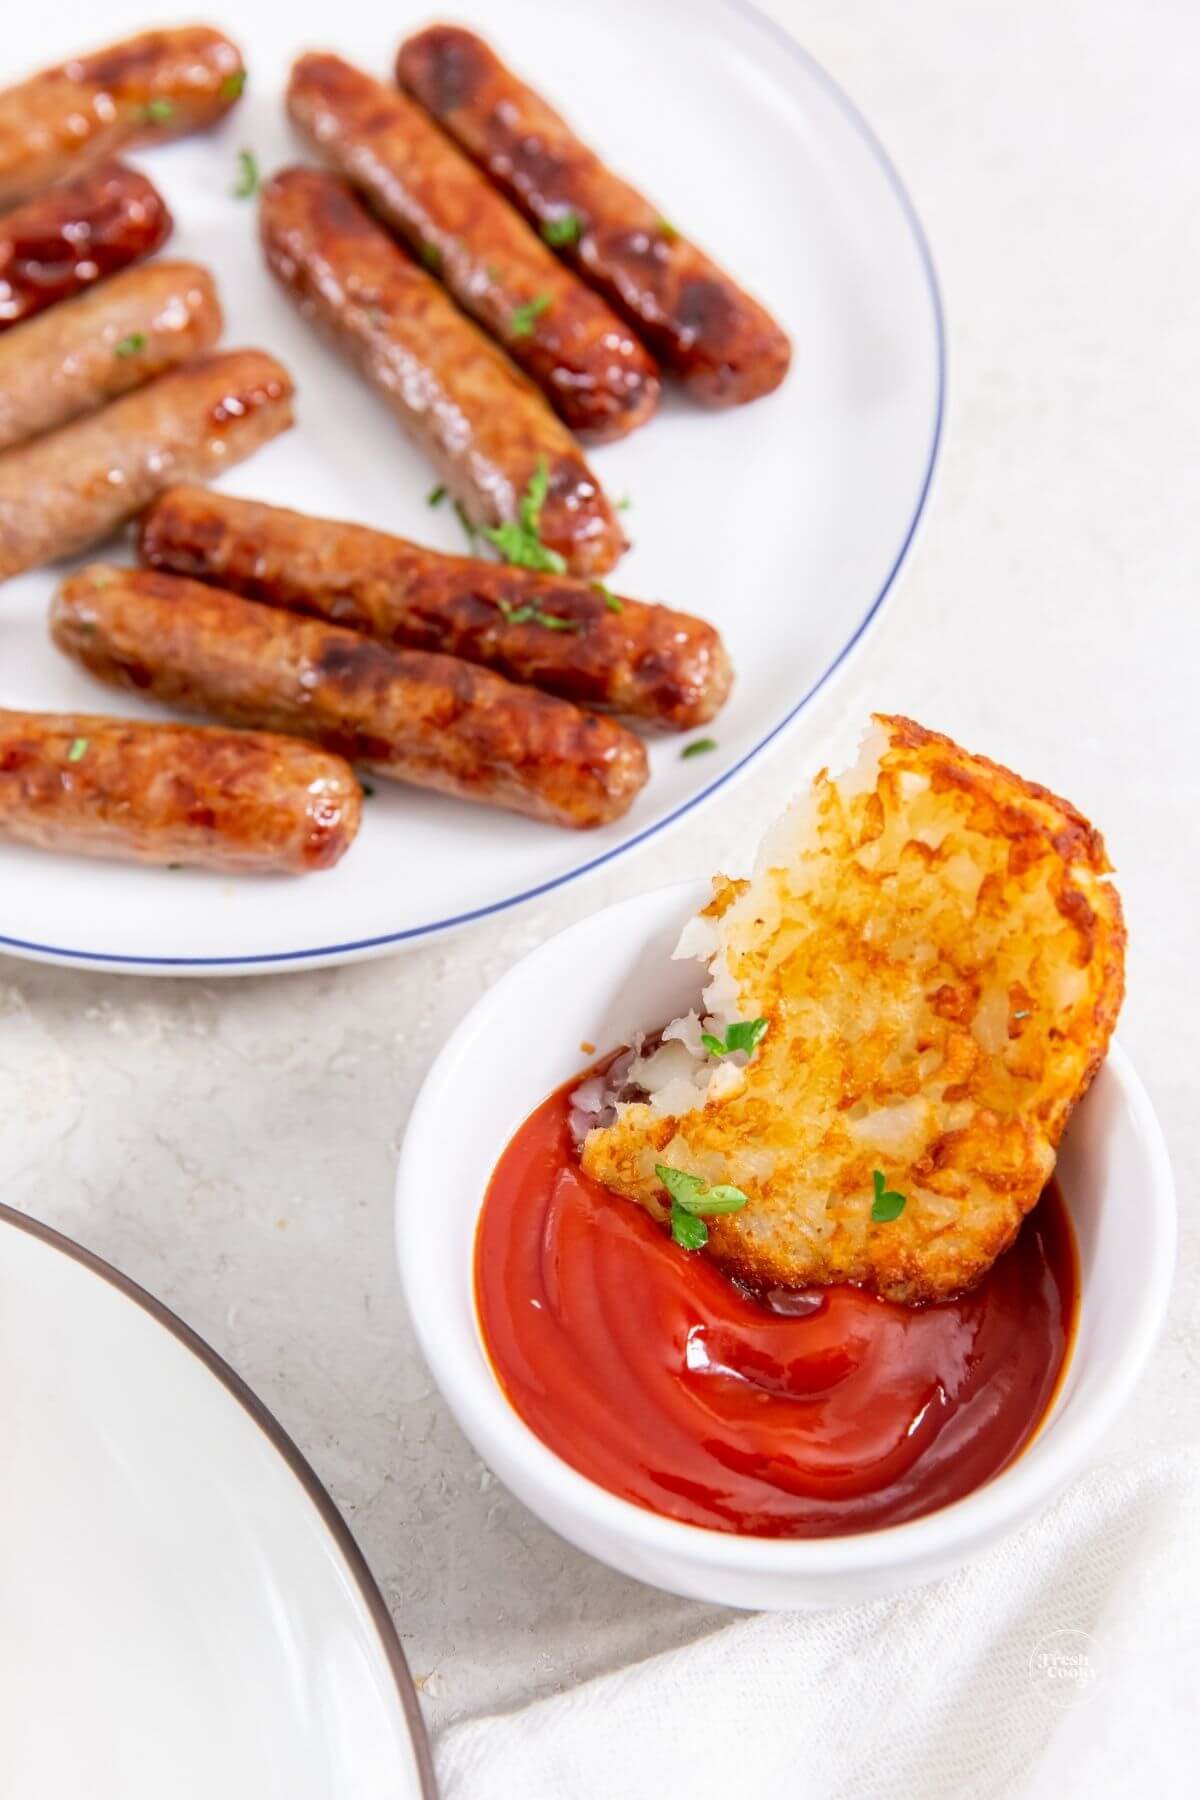 Half hash brown patty in ketchup with sausage links behind.